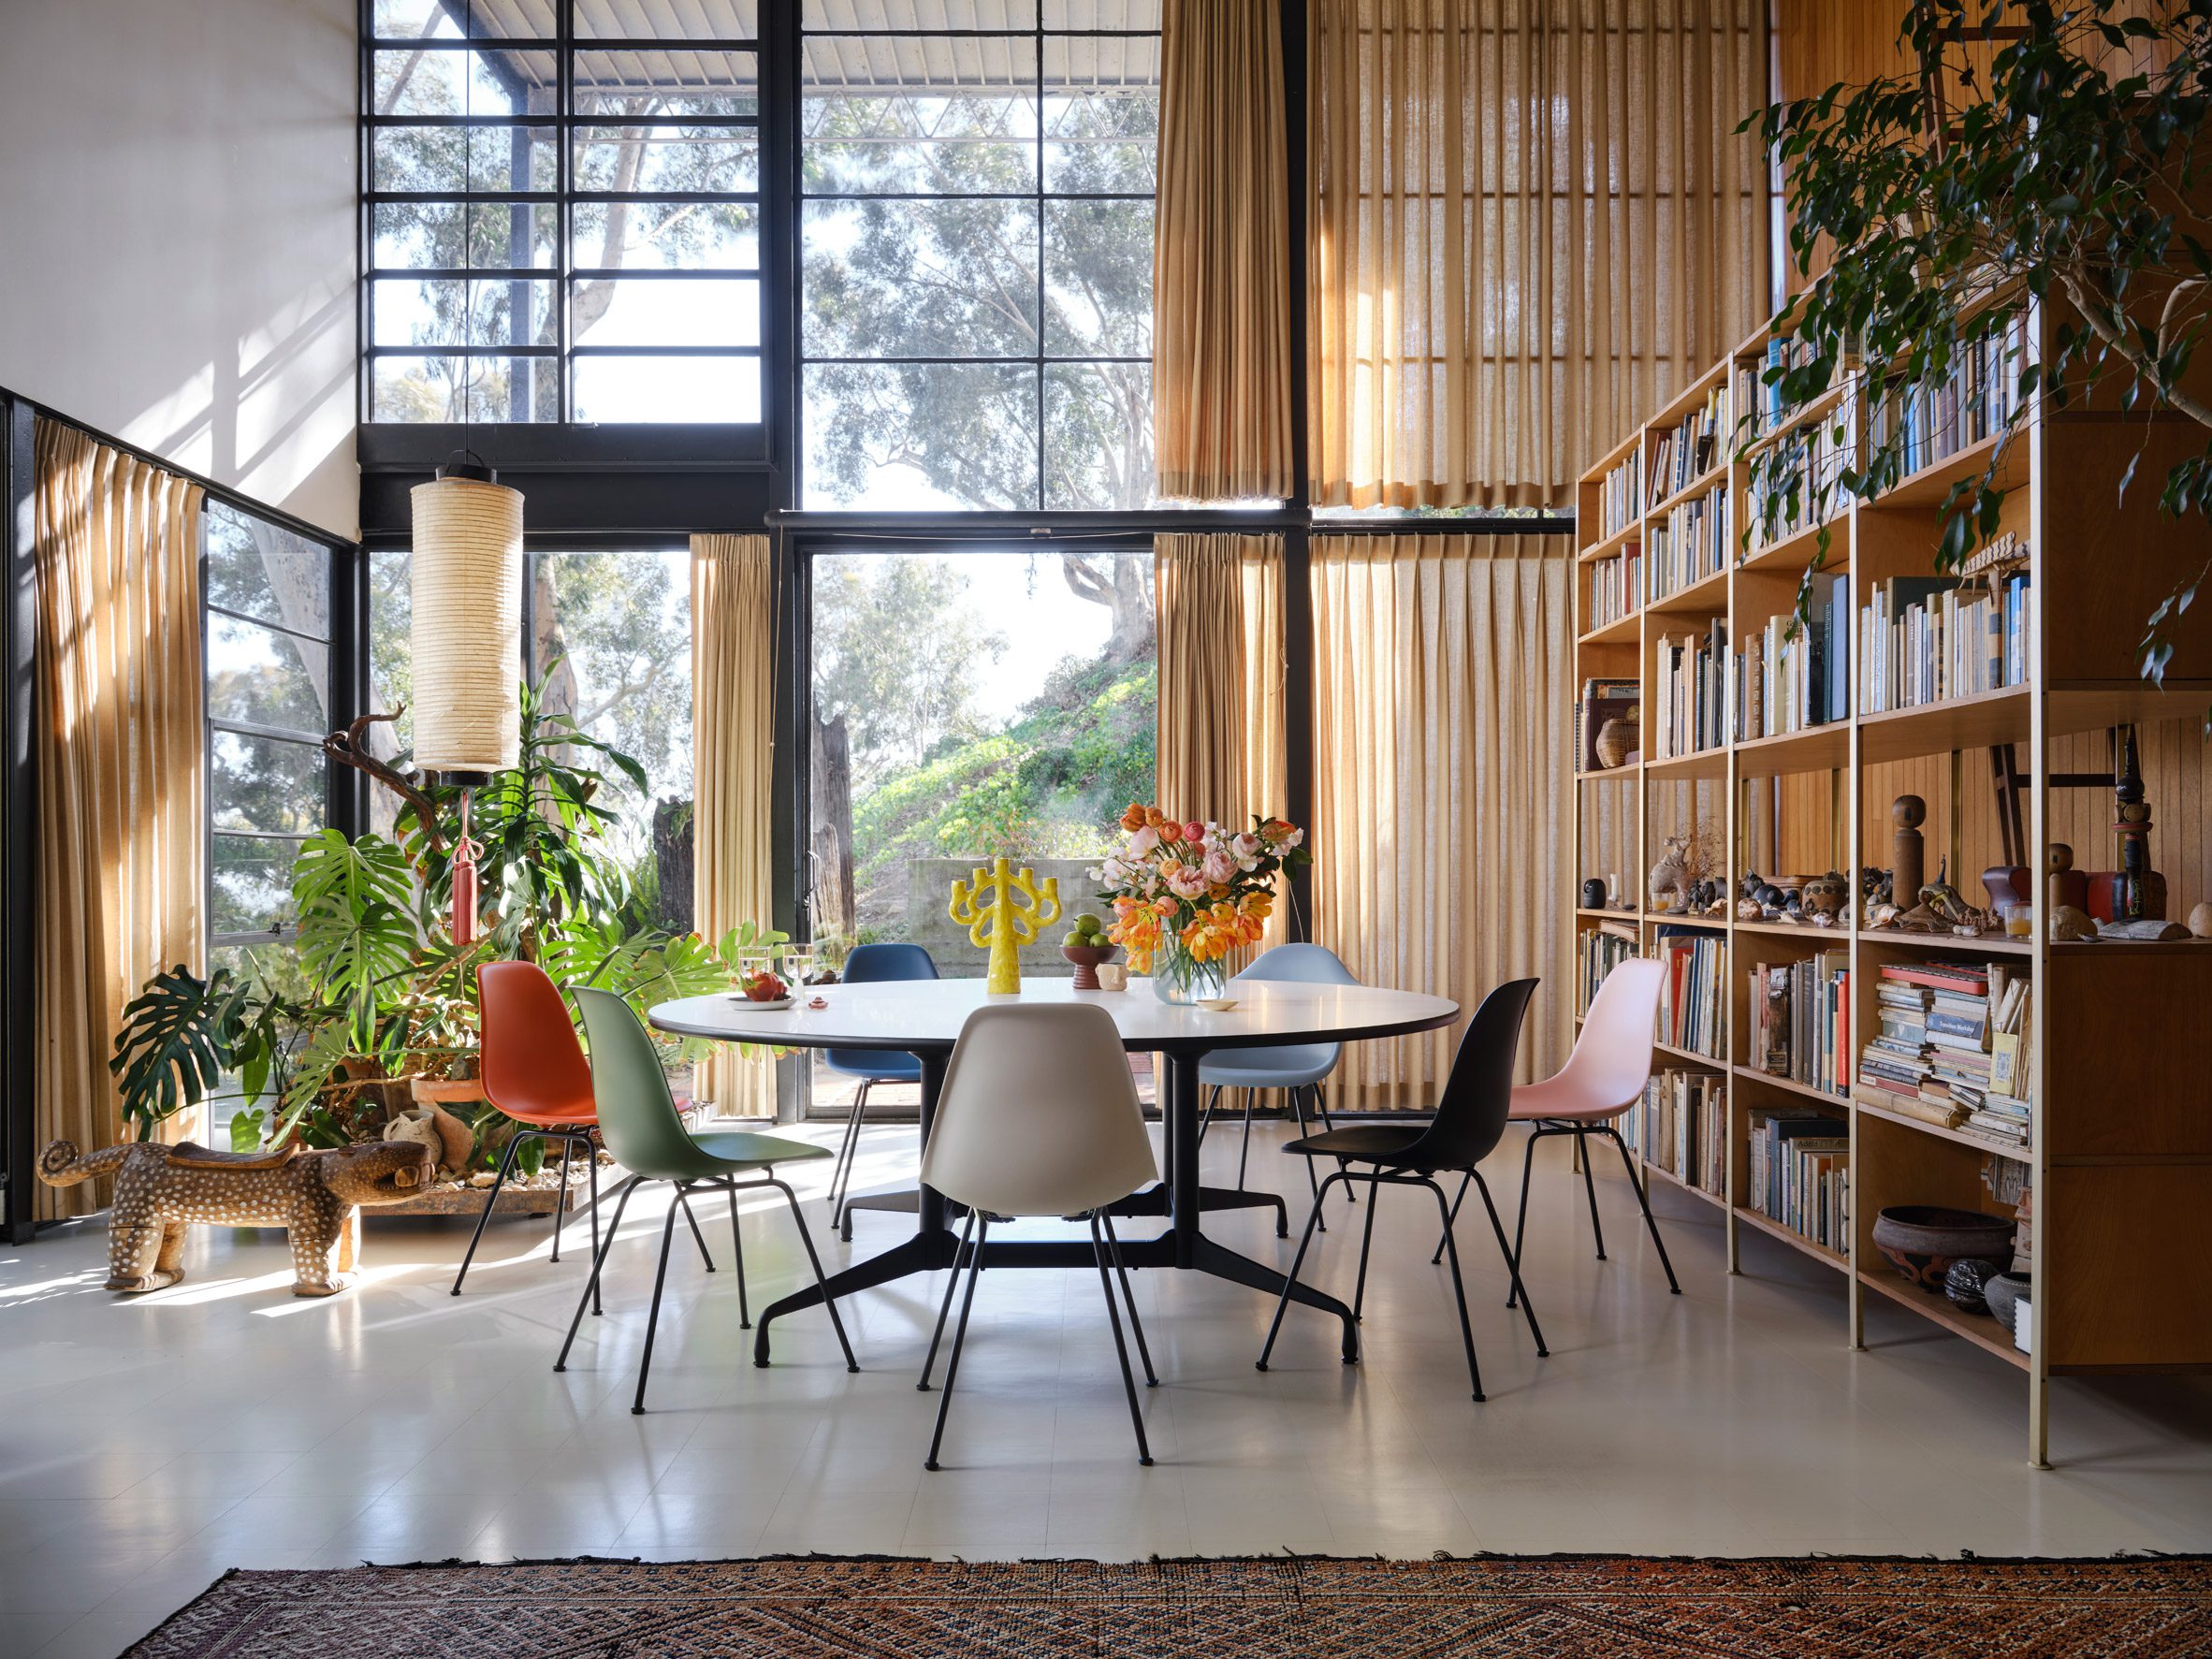 Staged at the Eames house, Pacific Palisades, California. Image © Eames Foundation, 2023.